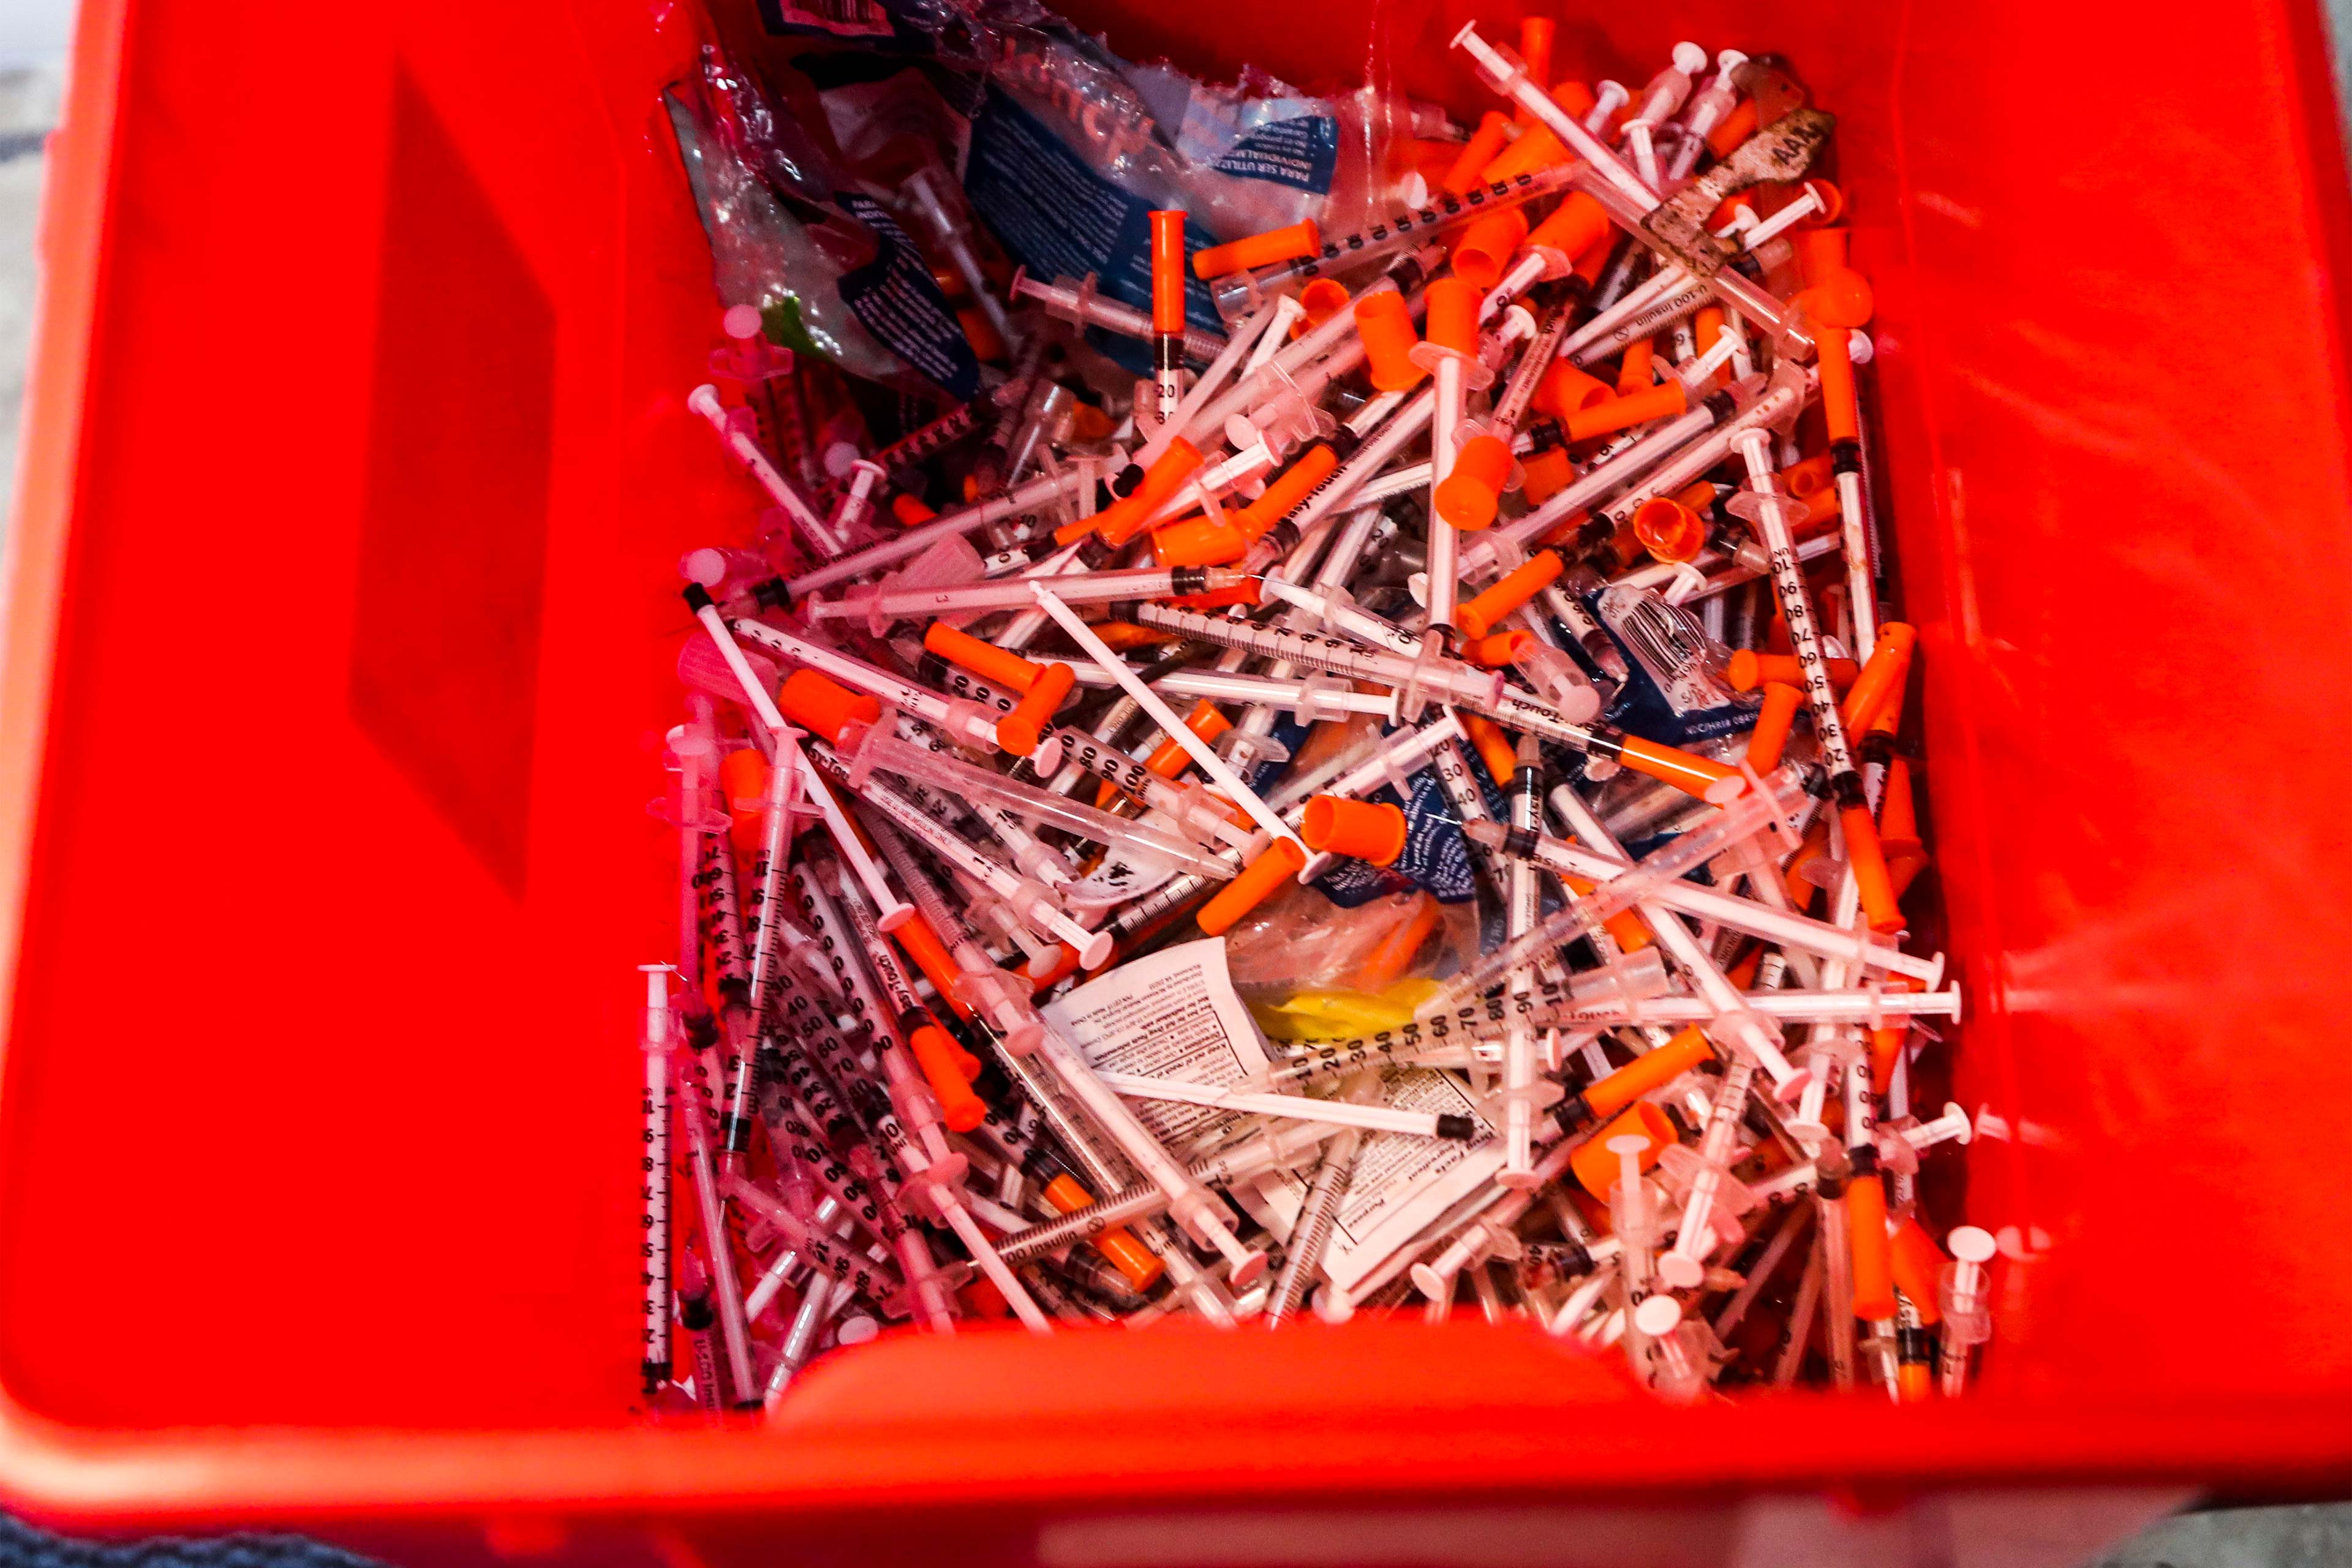 A photo of a red biohazard container filled with used needles.